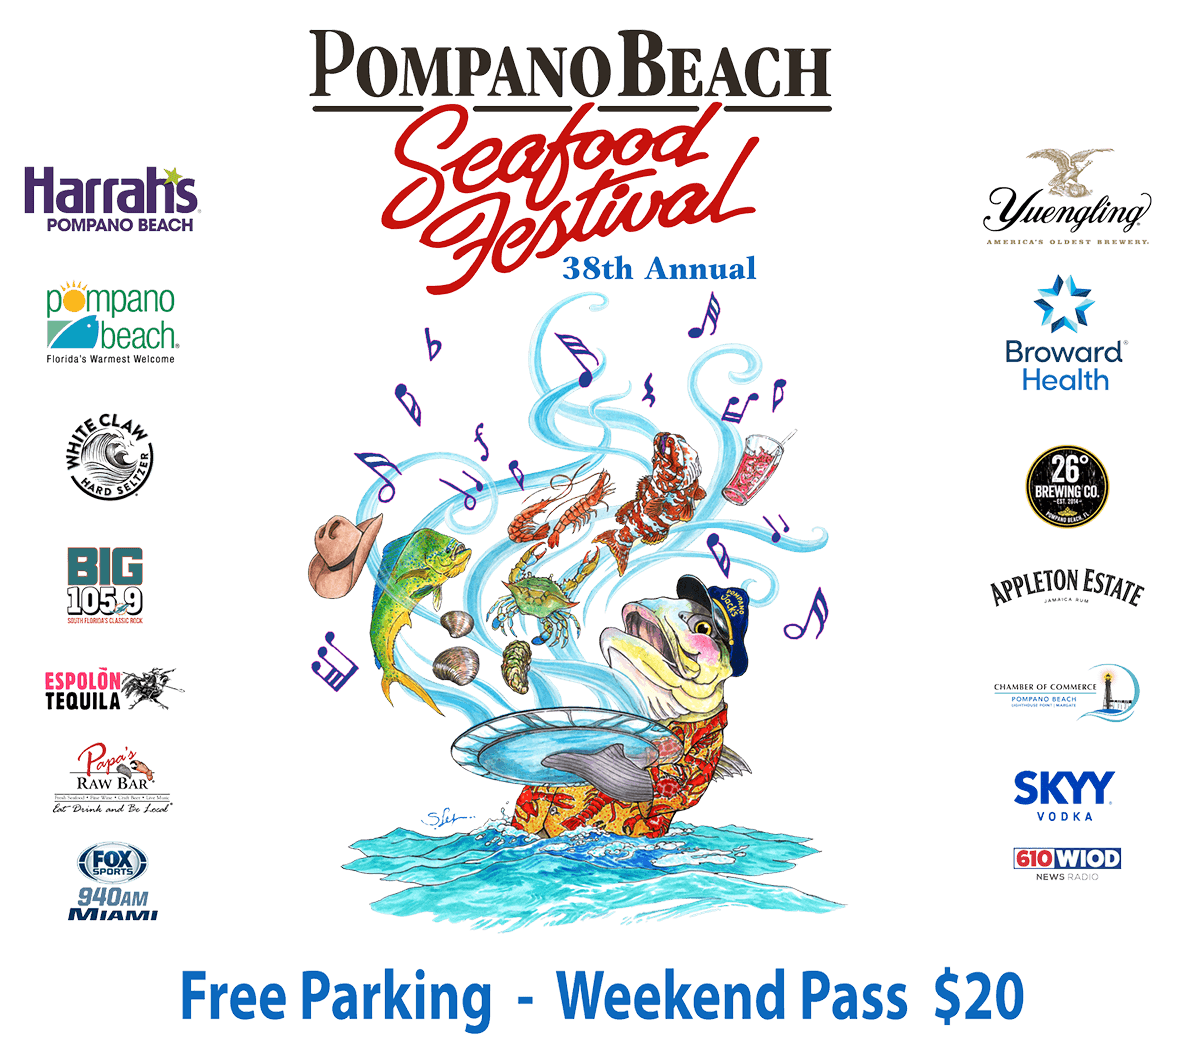 Pompano Beach Seafood Festival Promotional Flyer